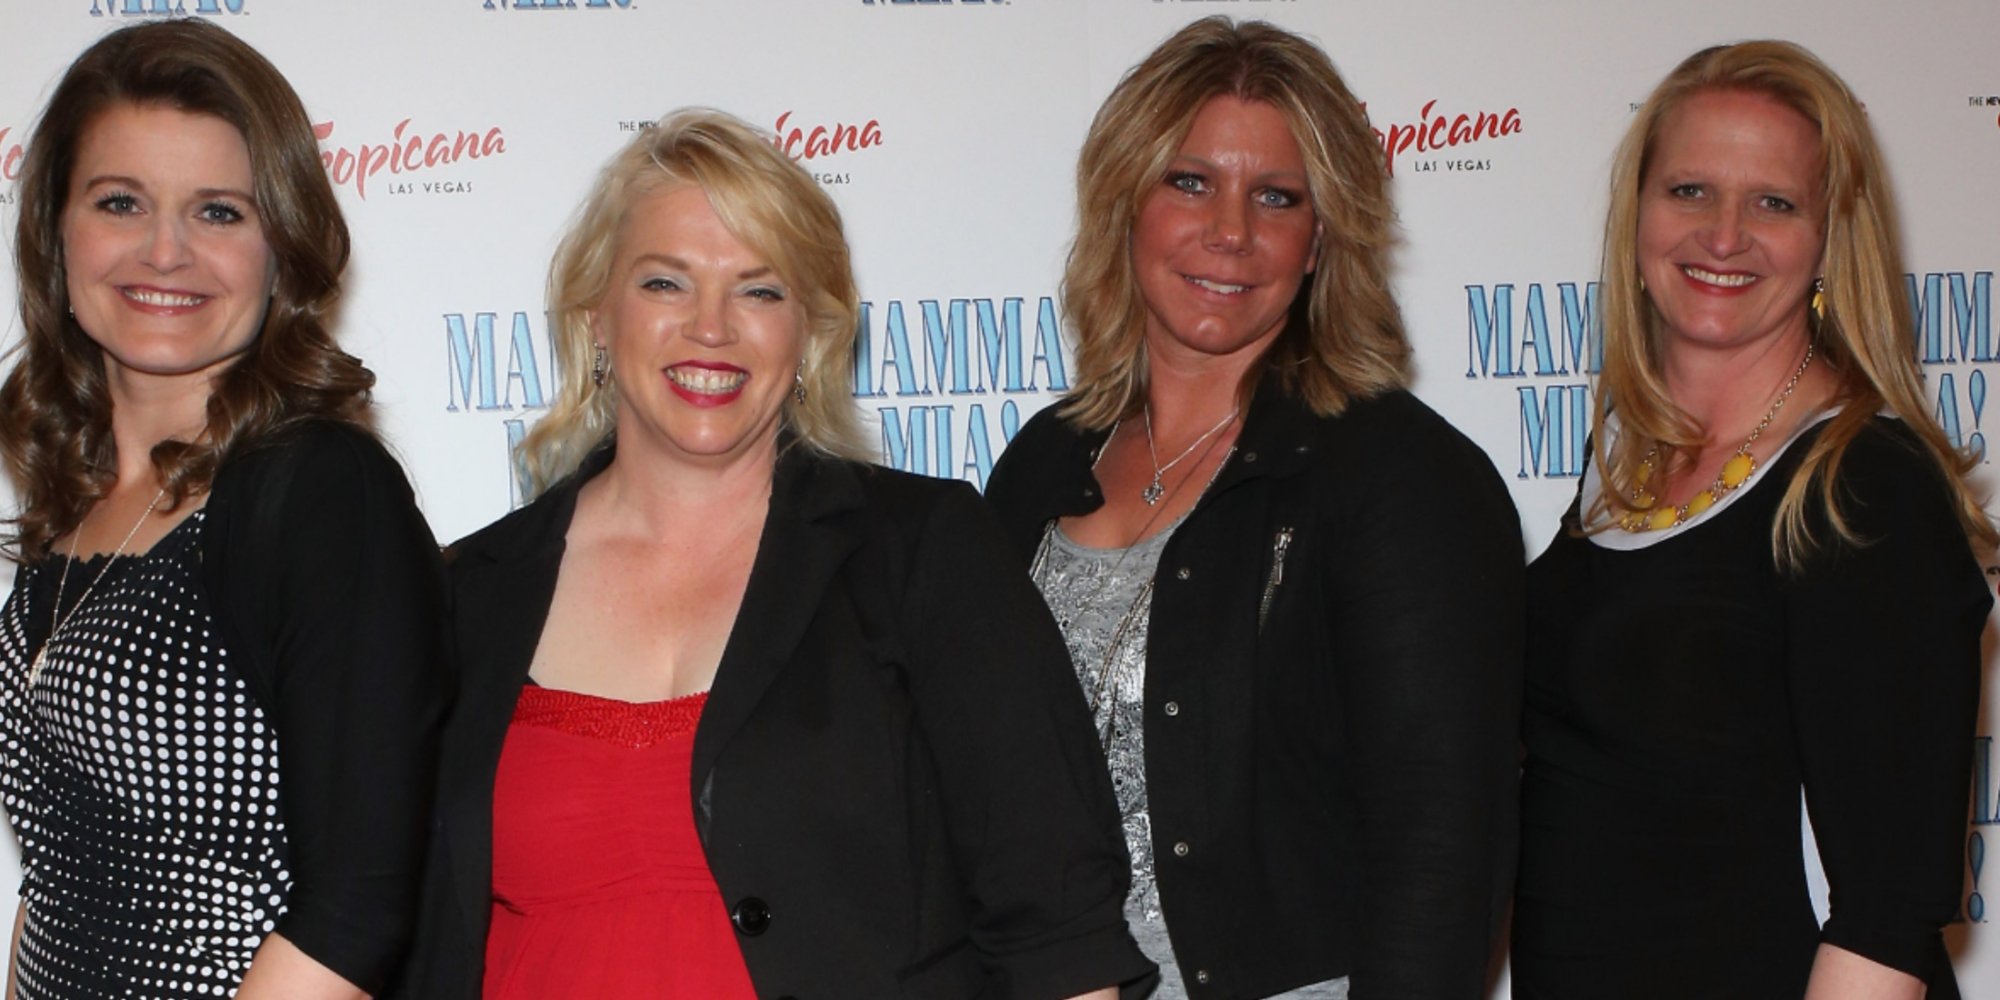 The cast of TLC's 'Sister Wives' includes Robyn, Janelle, Meri, and Christine Brown.